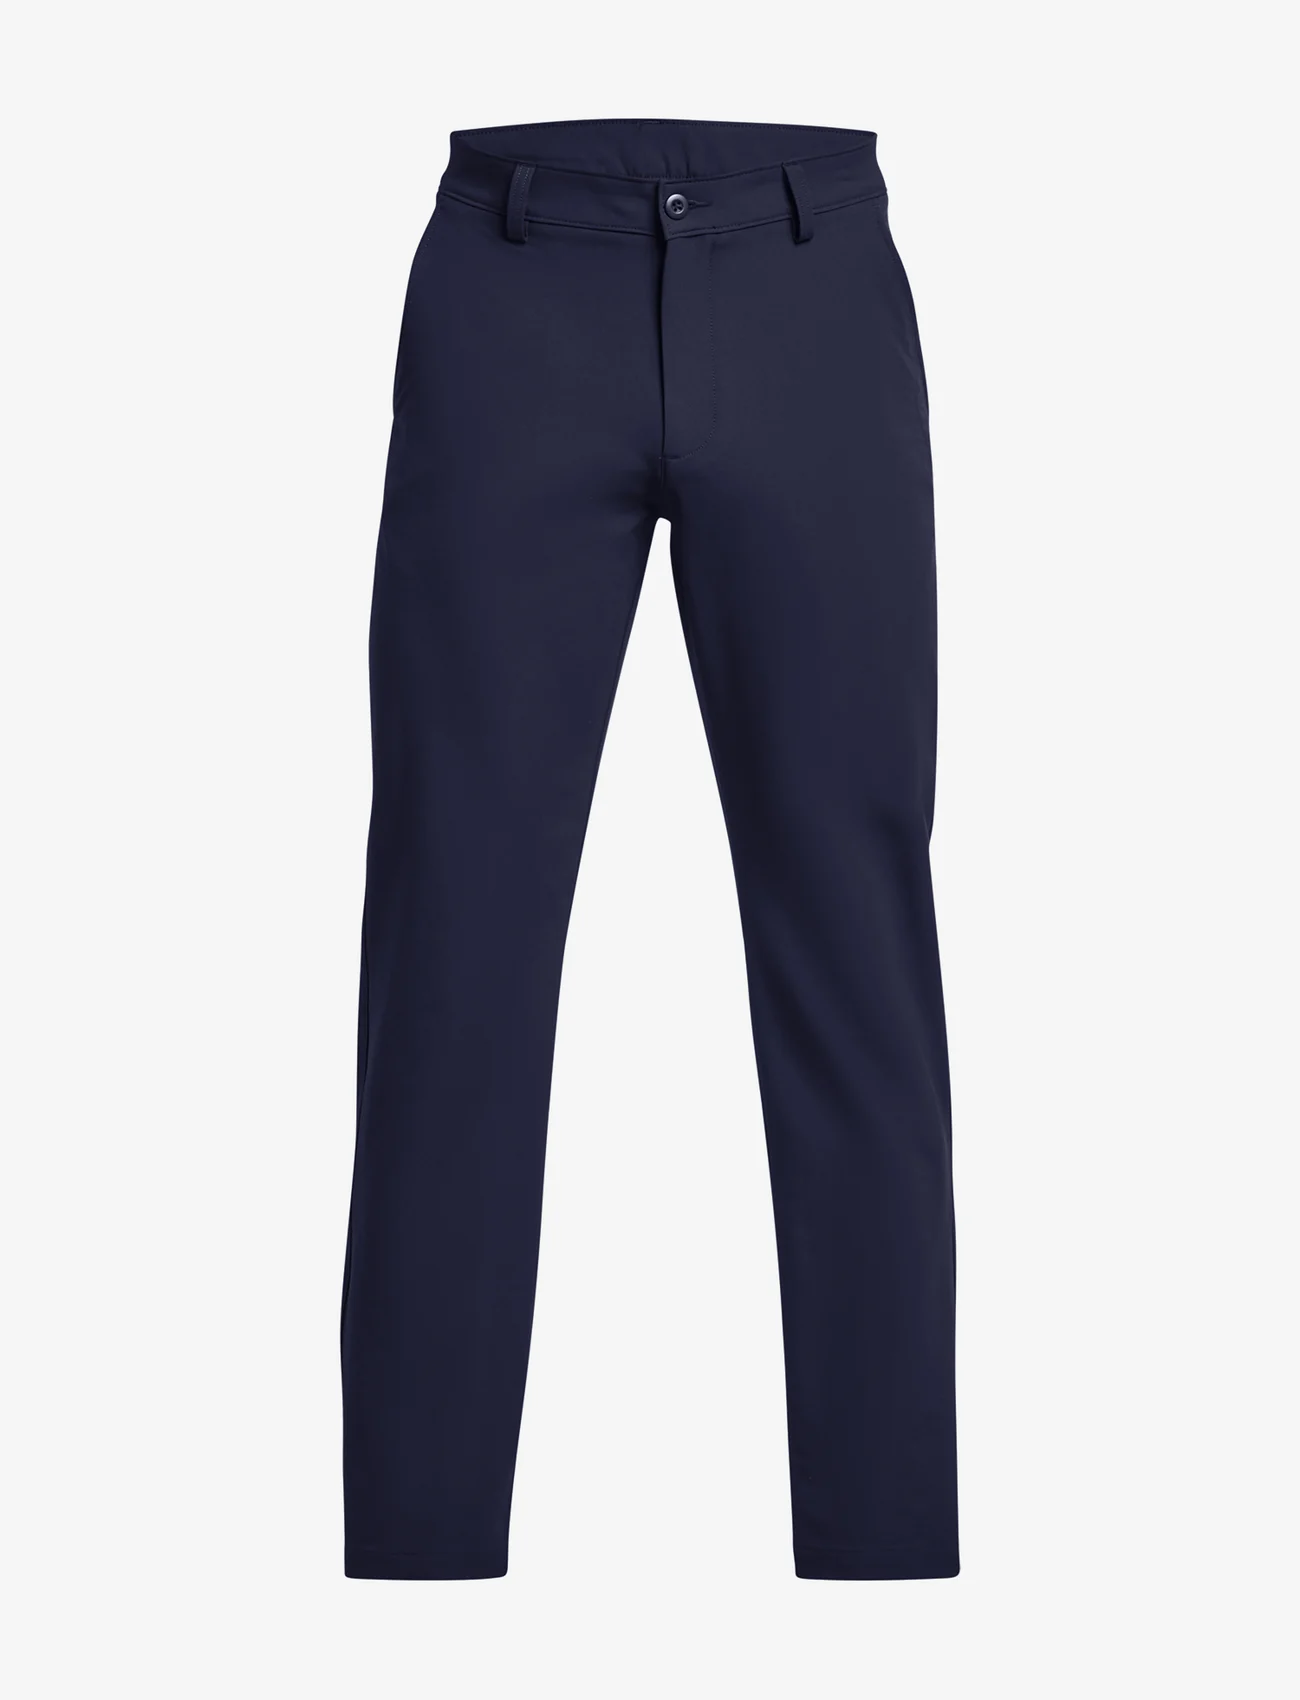 Under Armour - UA Tech Tapered Pant - golf pants - midnight navy - 0